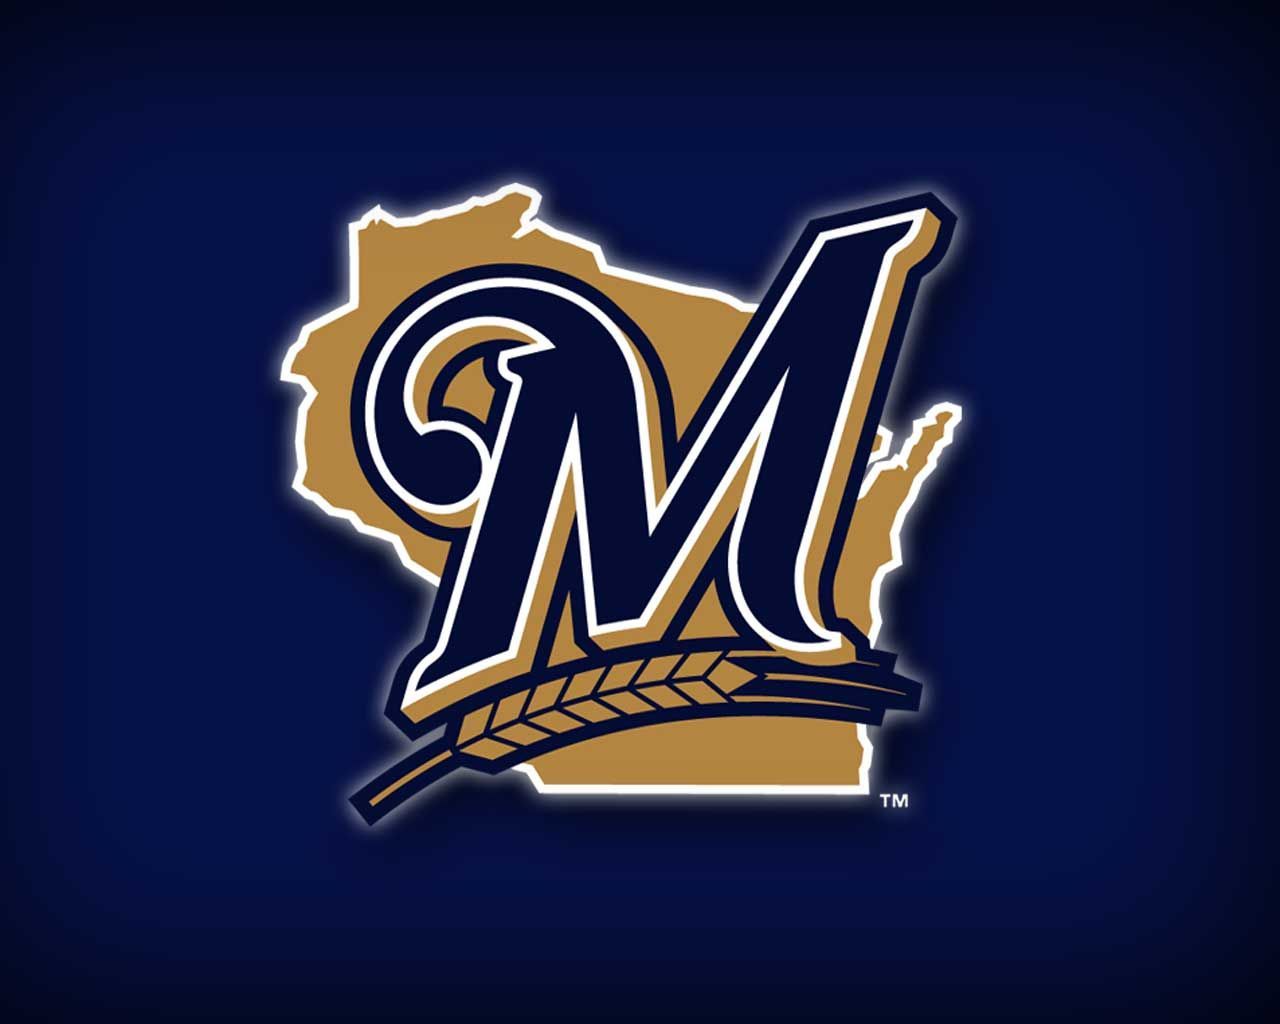 The Milwaukee Brewers are a professional baseball team based